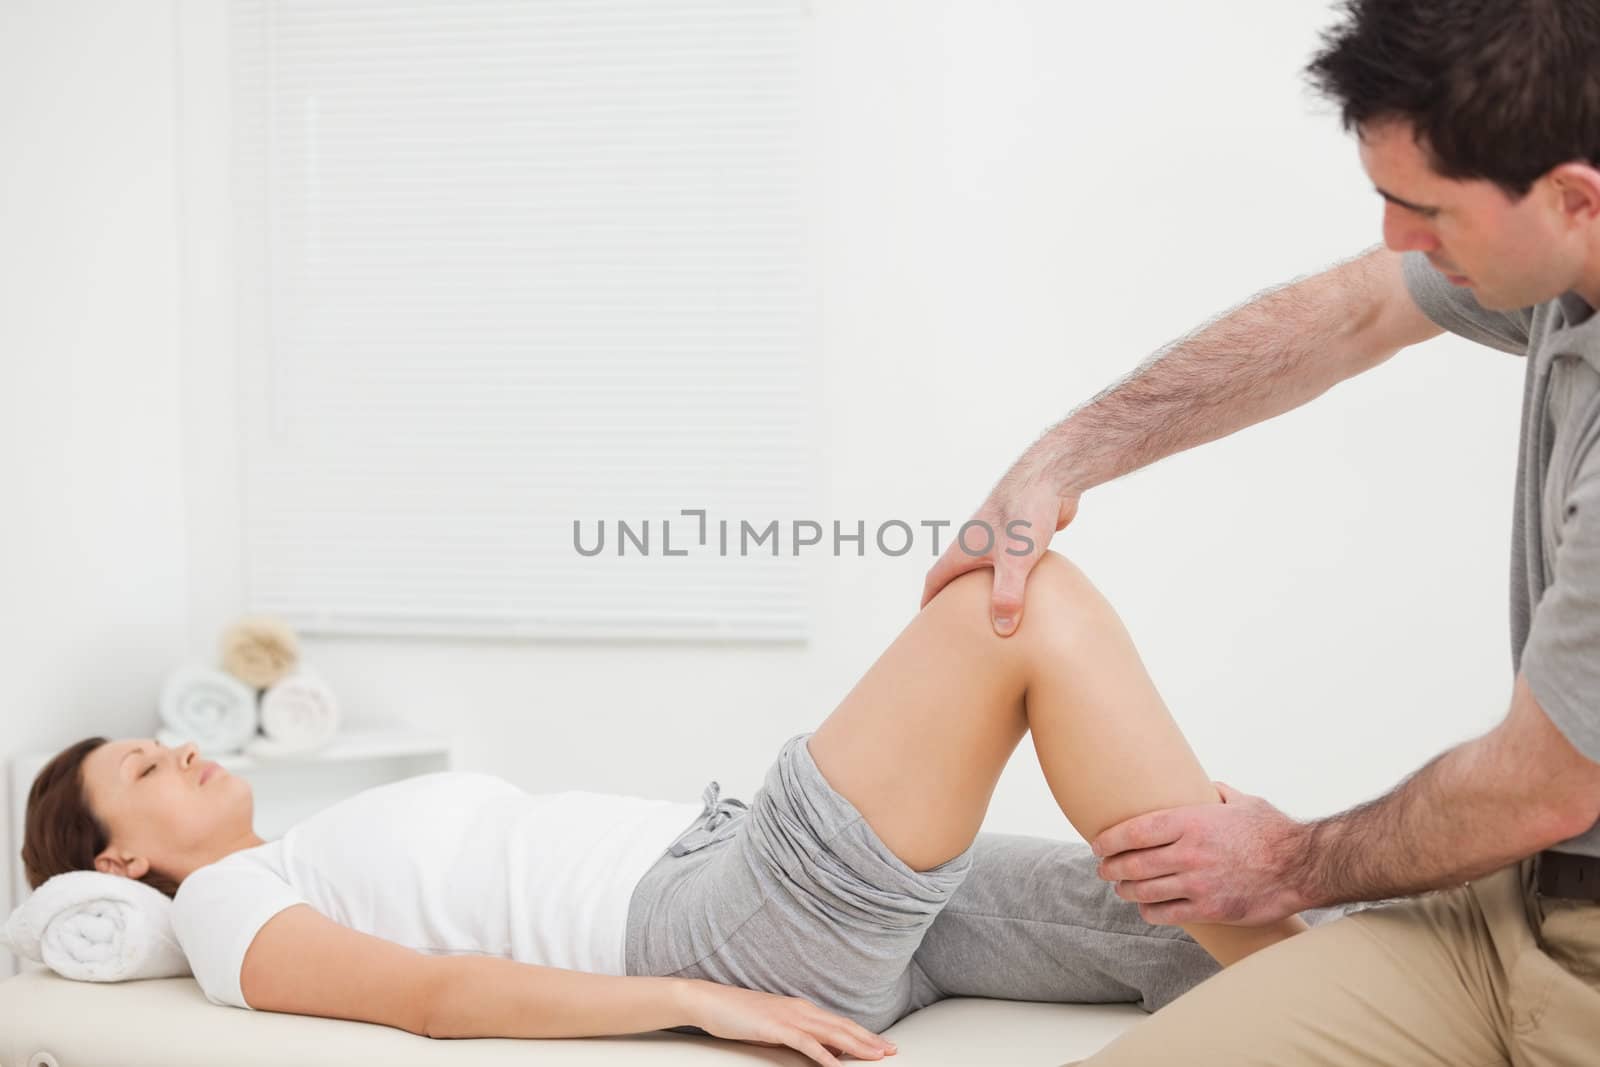 Brunette woman lying while a physiotherapist manipulates her leg indoors